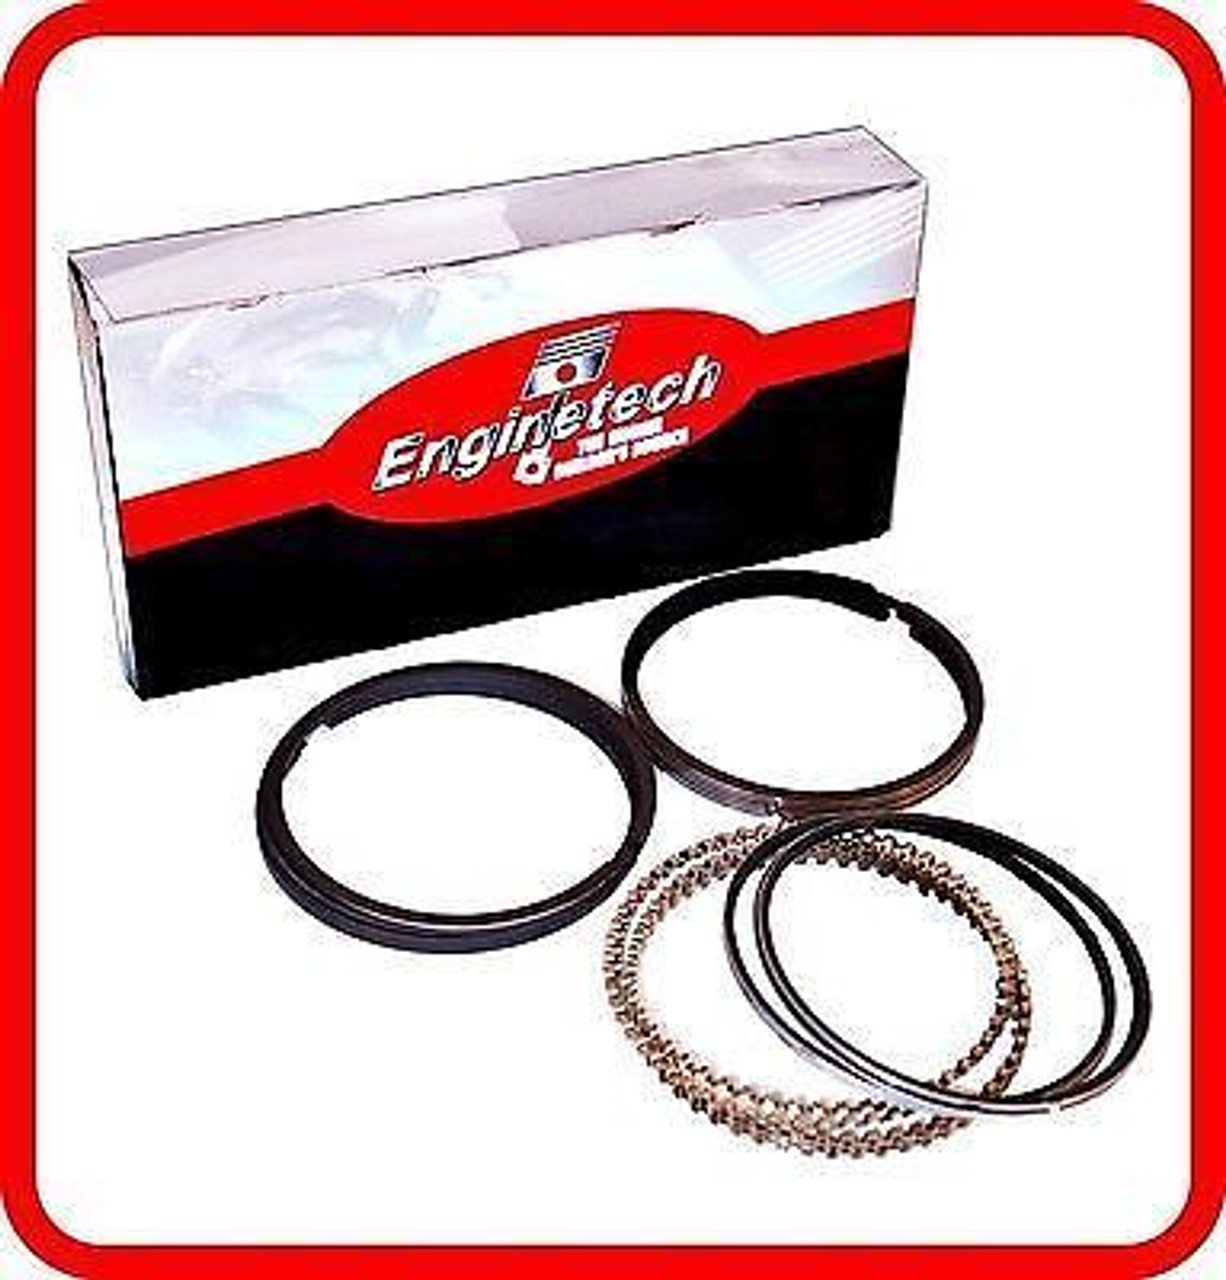 1991 Lincoln Town Car 4.6L Engine Piston Ring Set S90228 -4